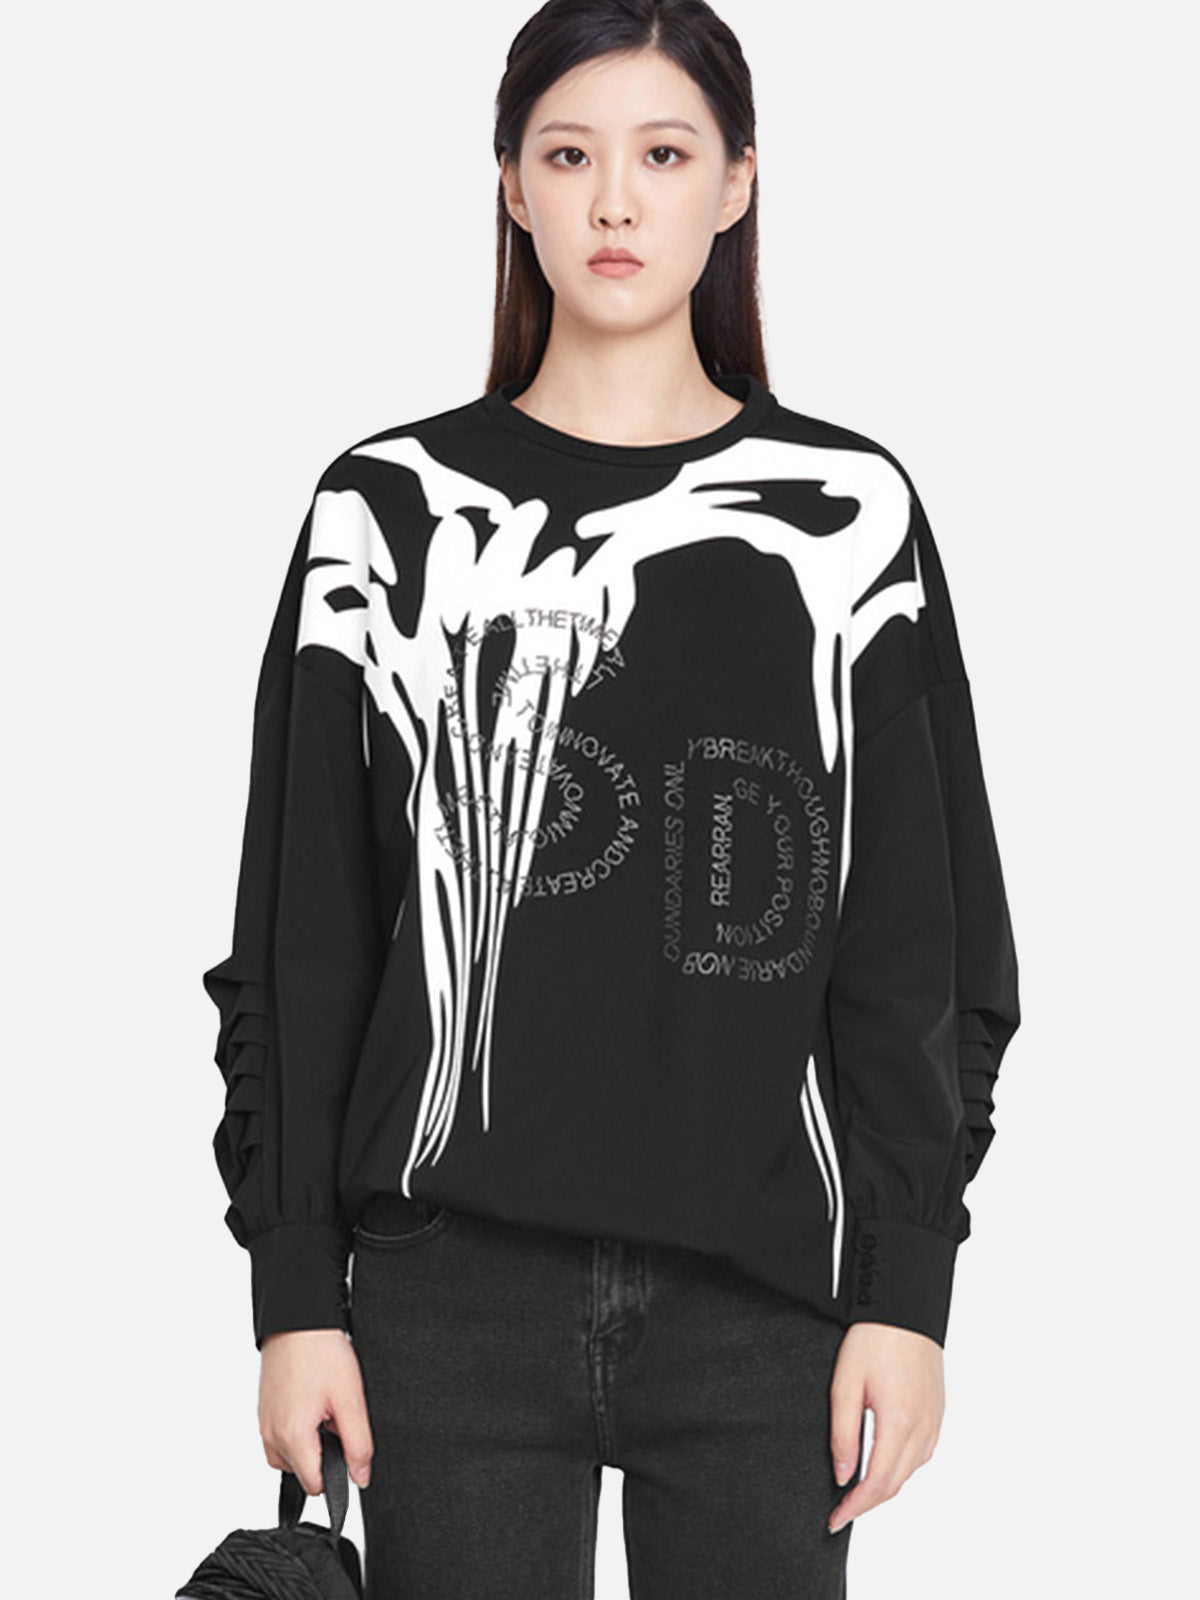 Fashion Round Neck Letter Pleated Contrast Printed Sweater